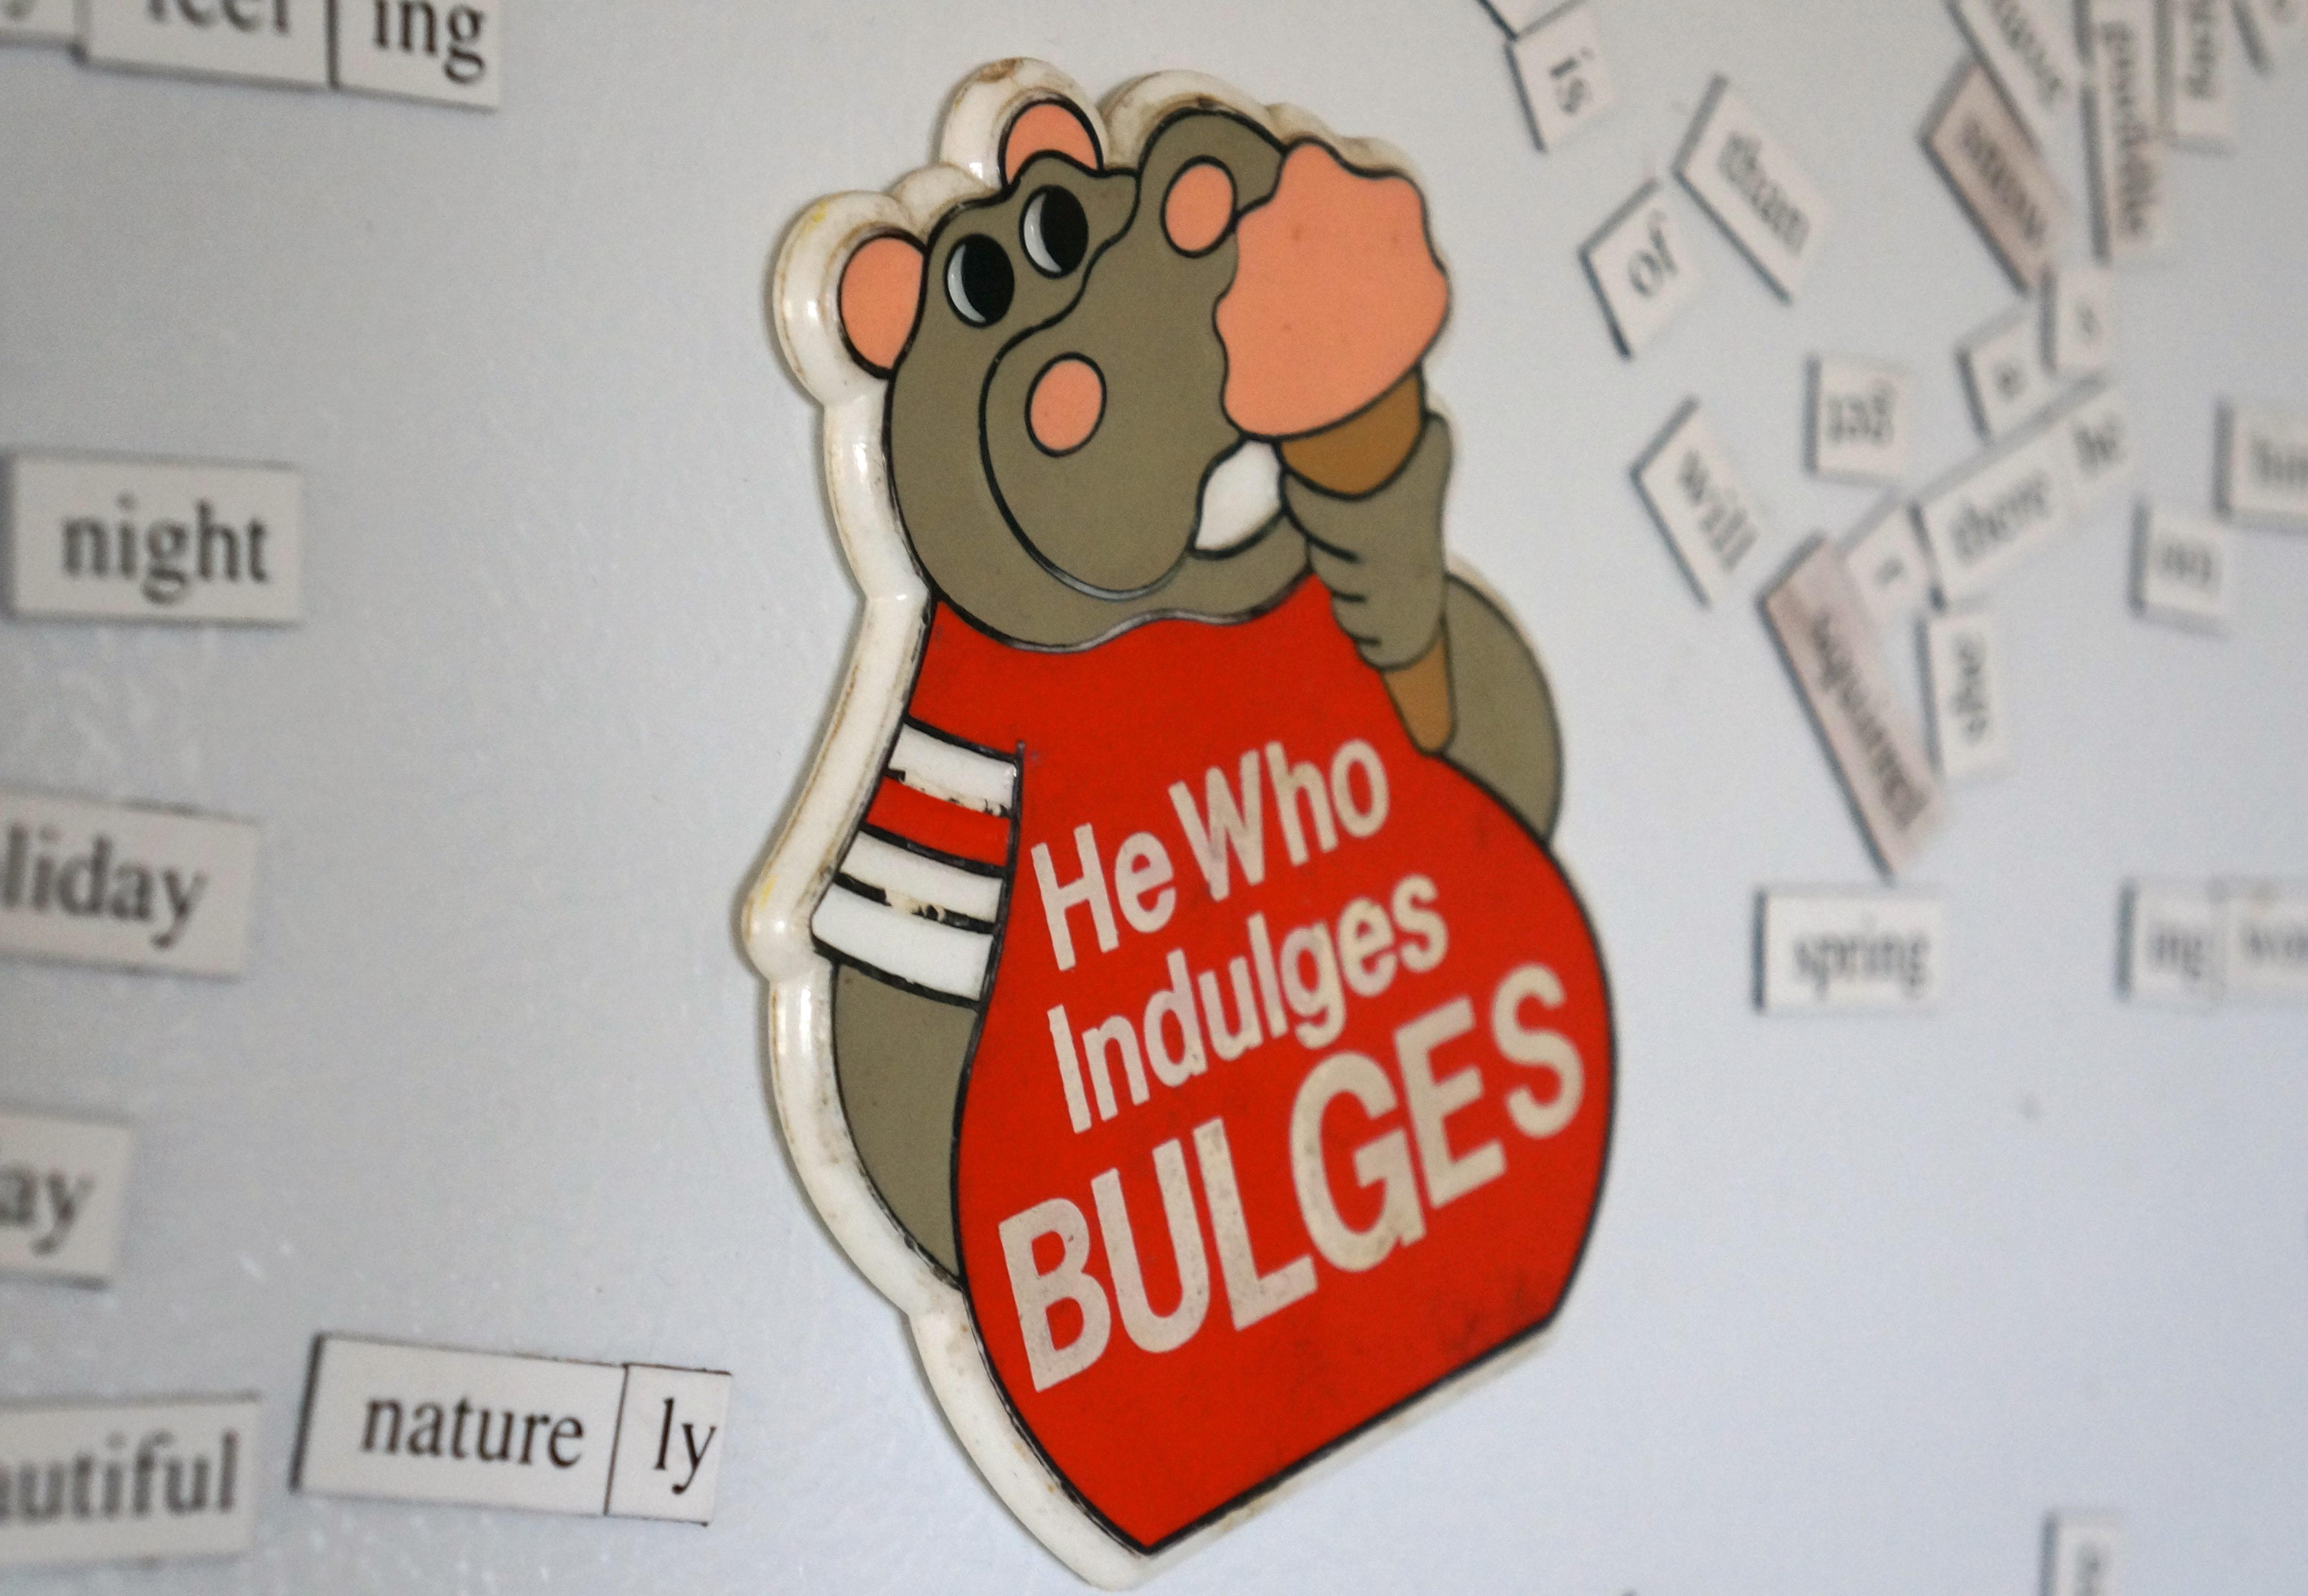 he who indulges bulges magnet